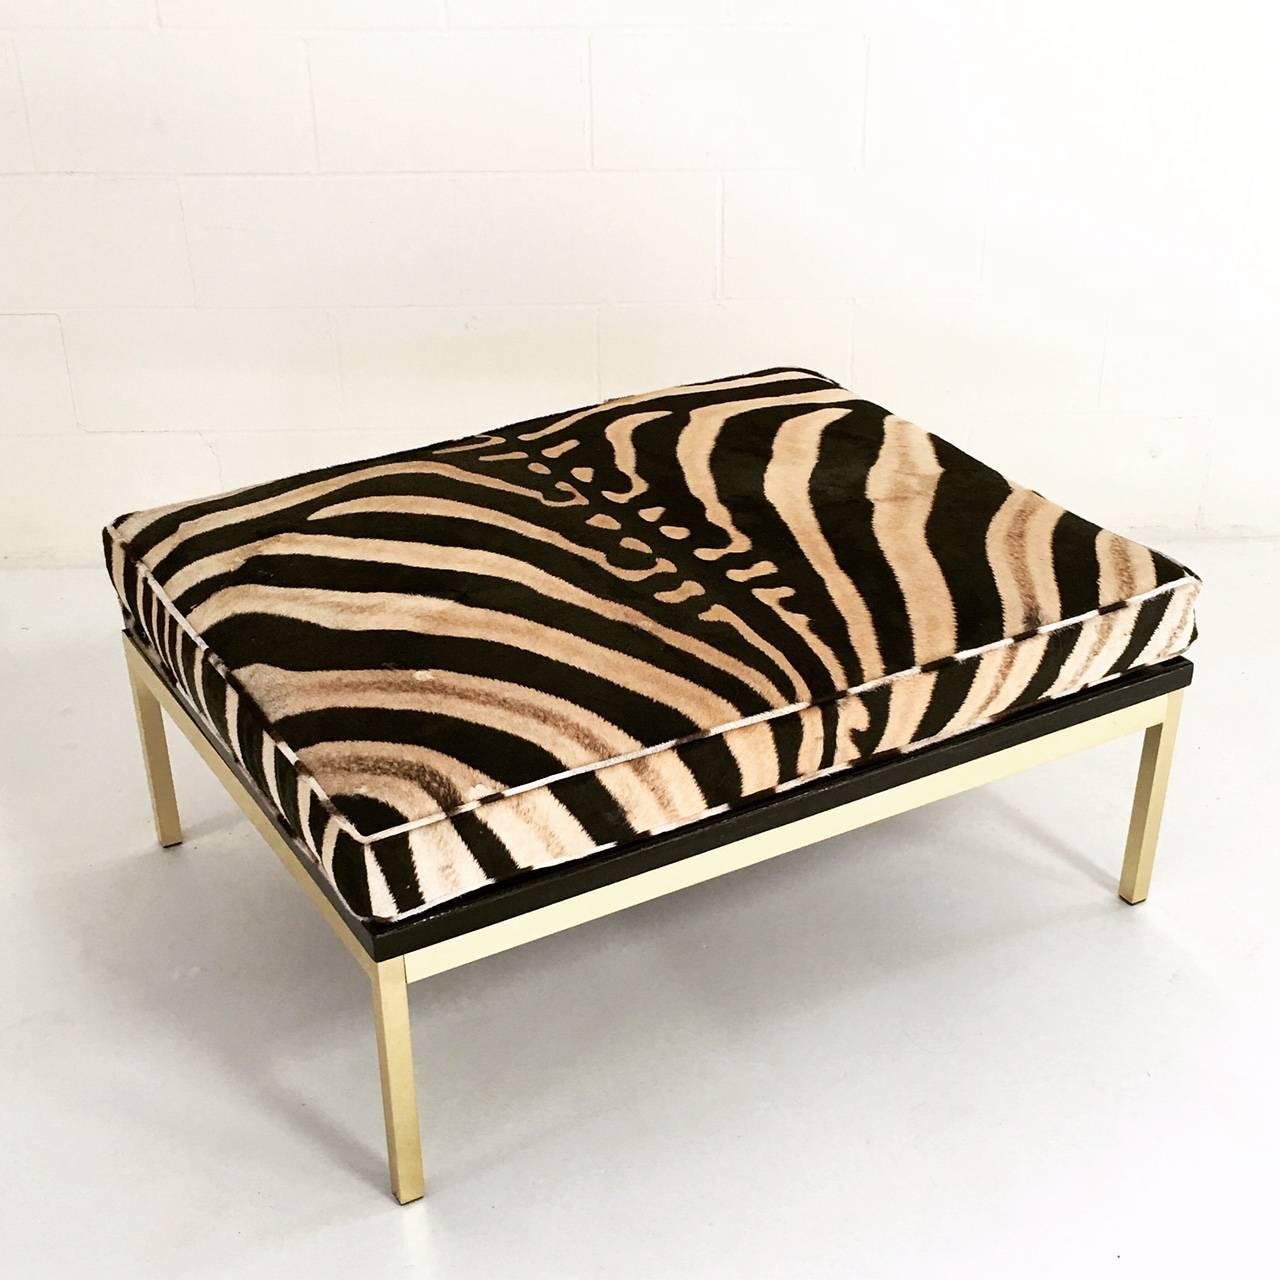 A stunning pair of Knoll style zebra and brass ottomans.
Beautiful, elegant, and minimal enough to fit in any style interior.

We love the simplicity in line and form of this amazing pair of Knoll style ottomans. However, it's the way in which